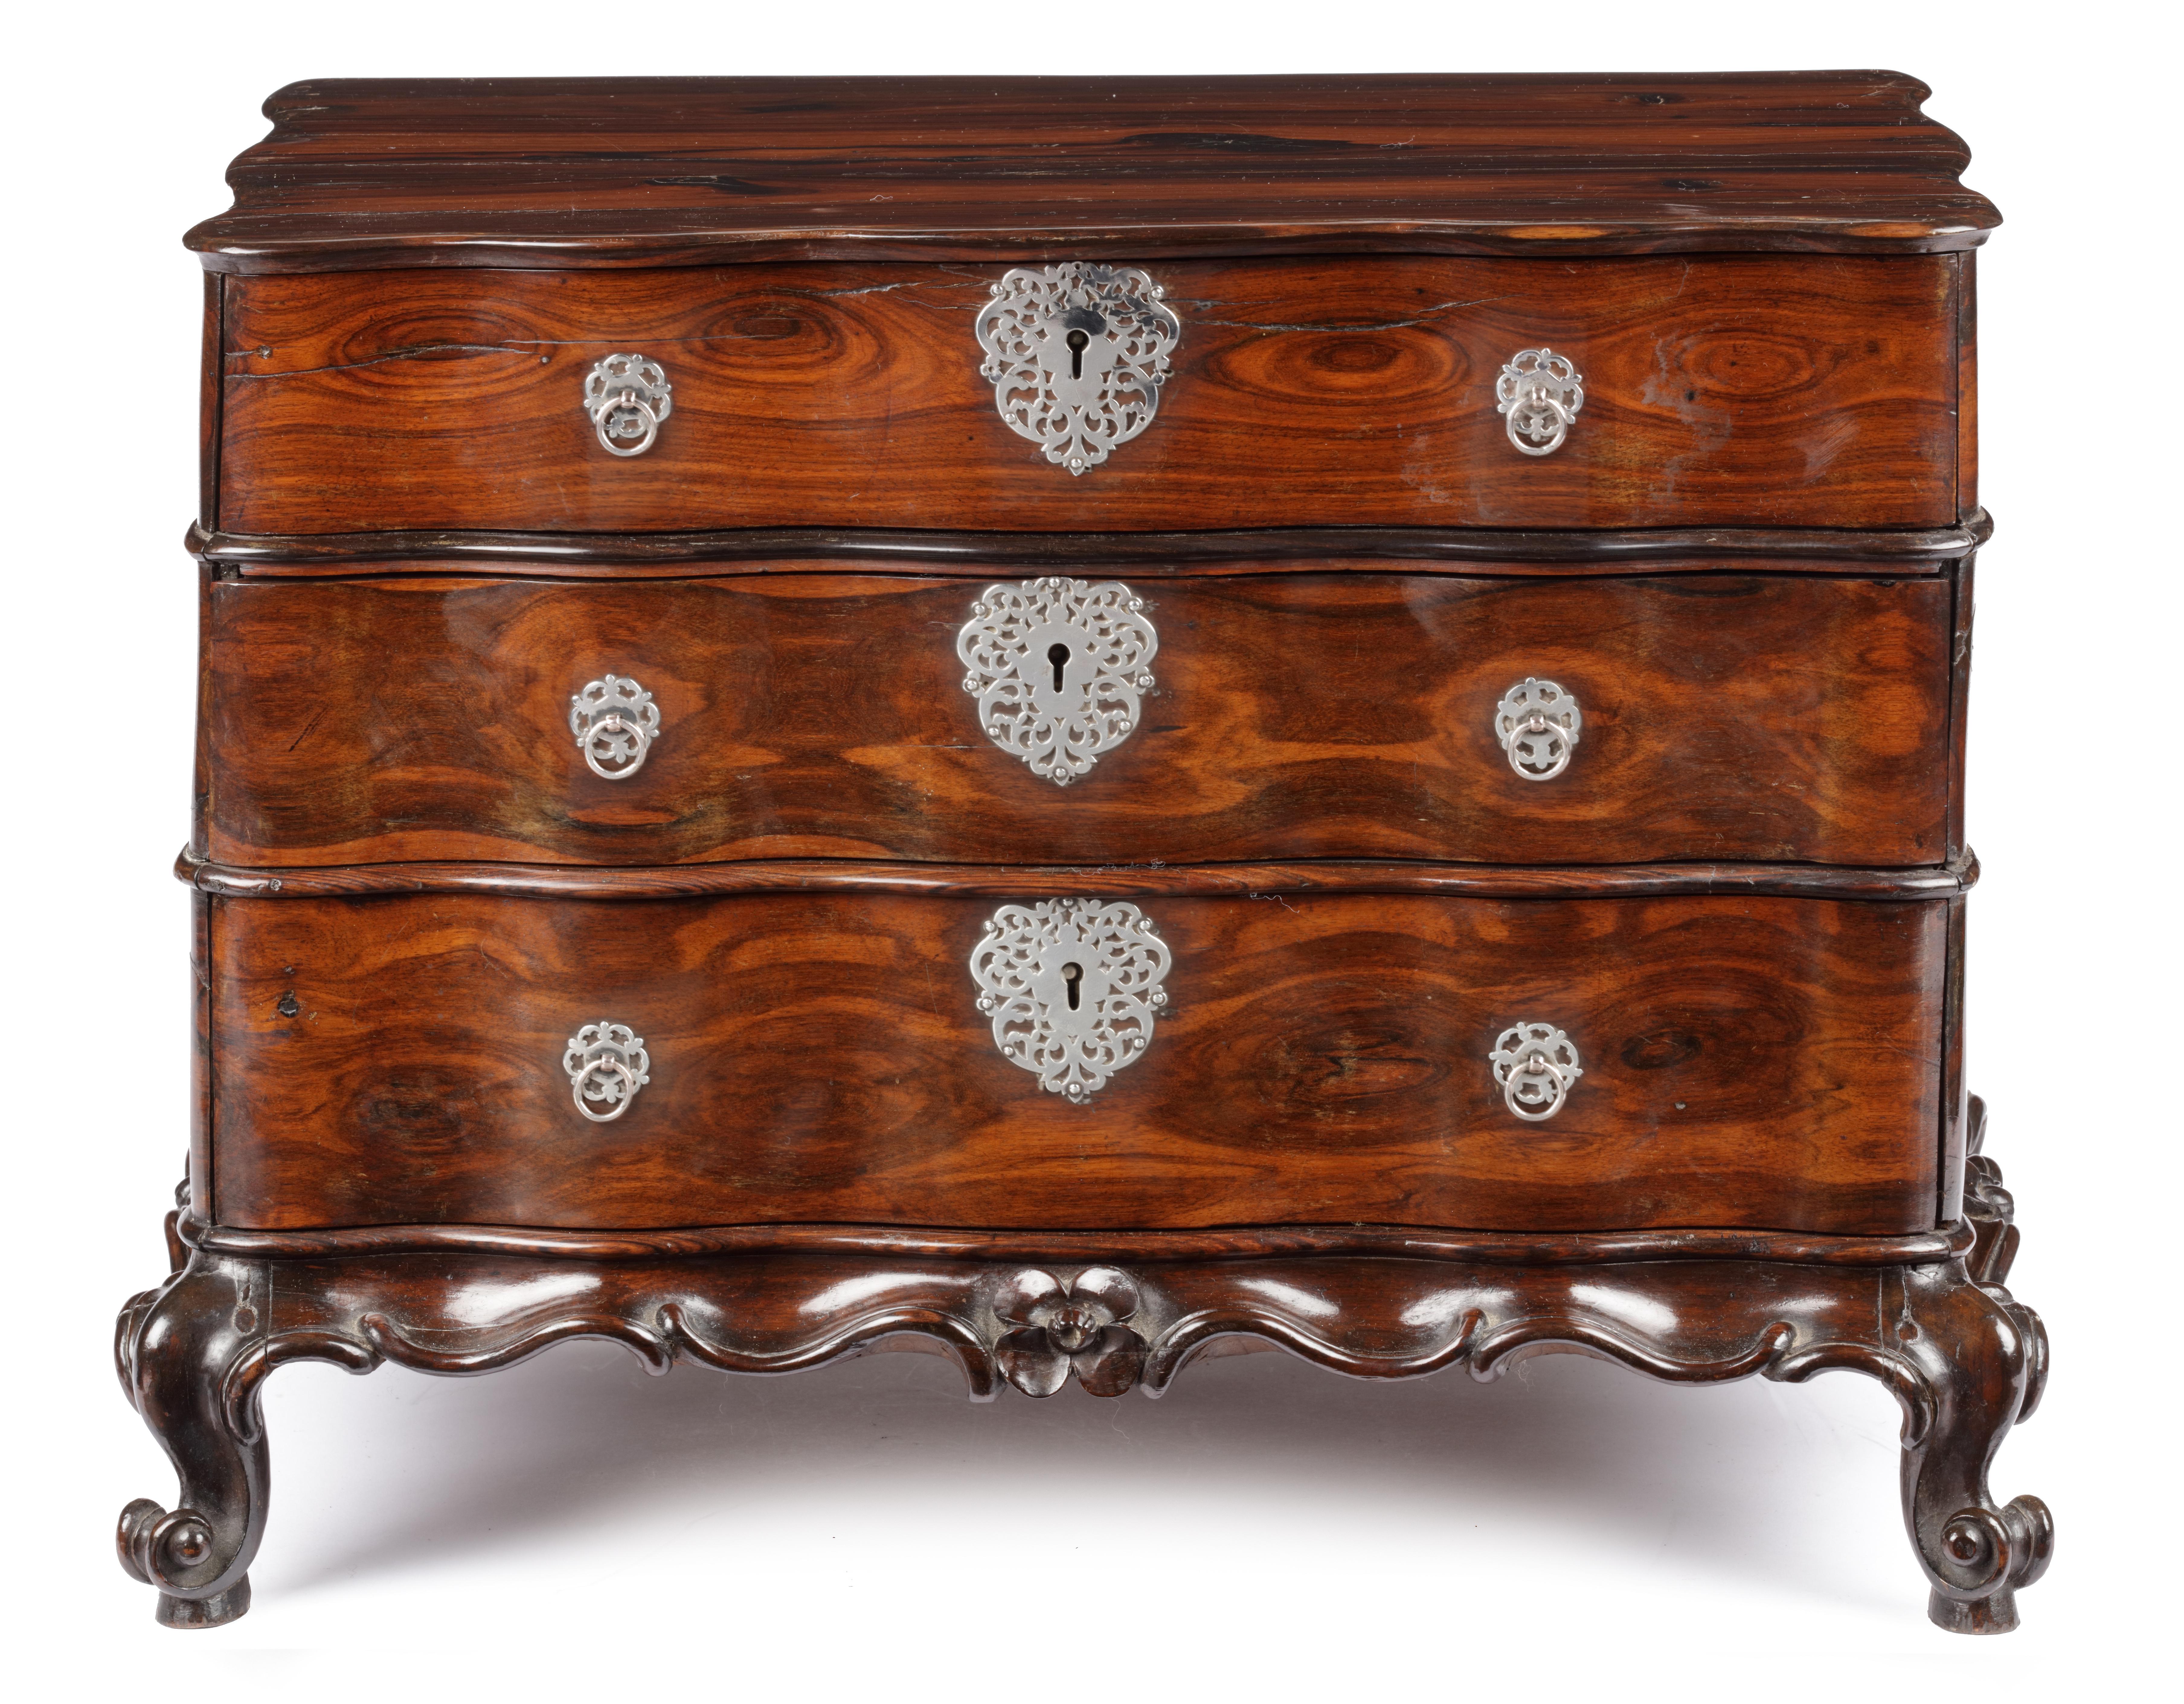 A Dutch-colonial Sri Lankan coromandel wood miniature chest of drawers with silver mounts

Sri Lanka, 18th century, circa 1750
 
H. 35 x W. 48 x D. 32 cm

Apart from being a highly decorative object and a status symbol, these miniature pieces of